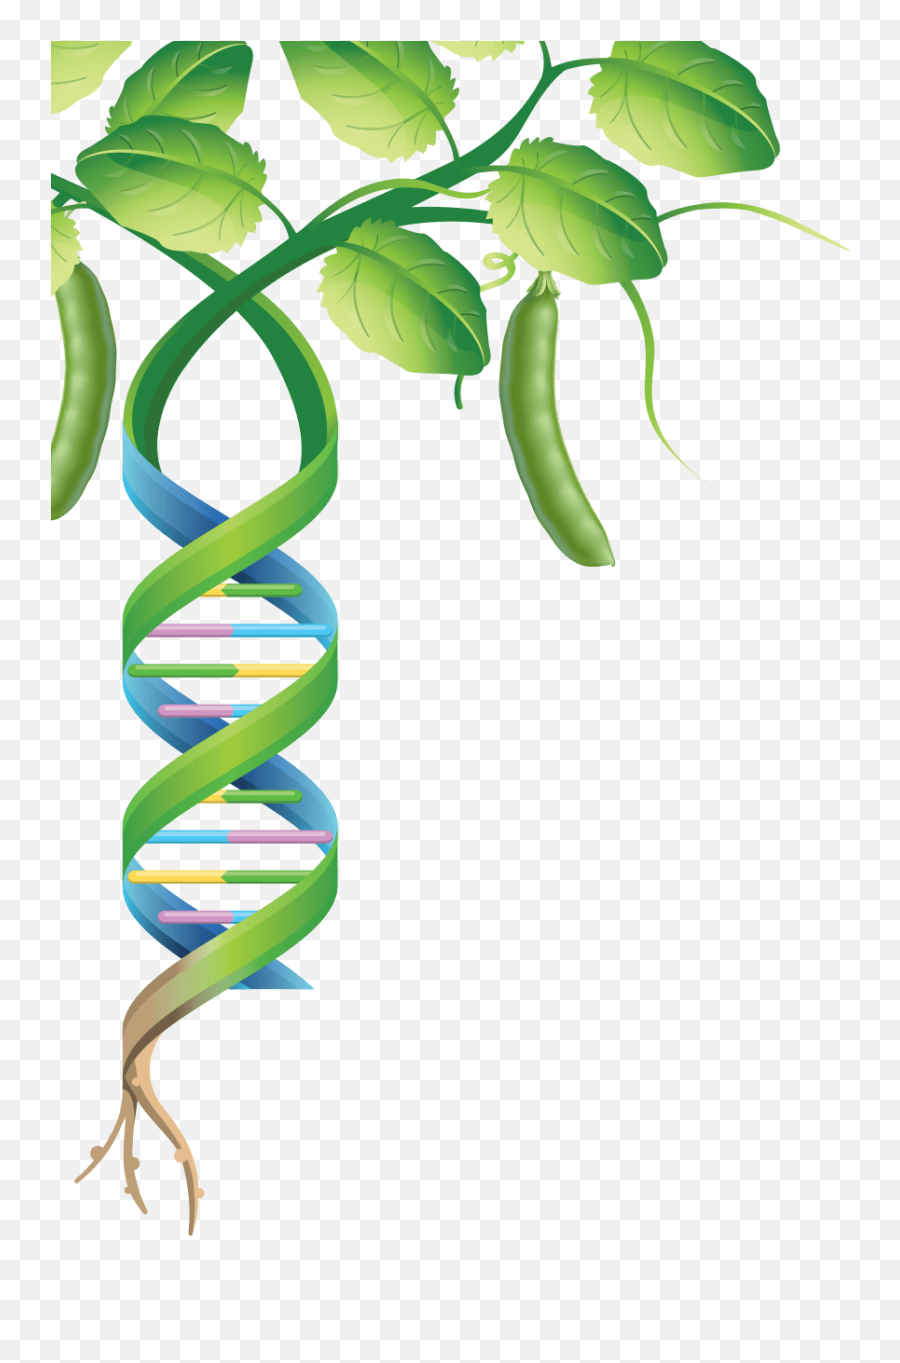 Mapping Genomes Pulses - Pea Plant Transparent Background Pea Plants Png Emoji,Plant Transparent Background